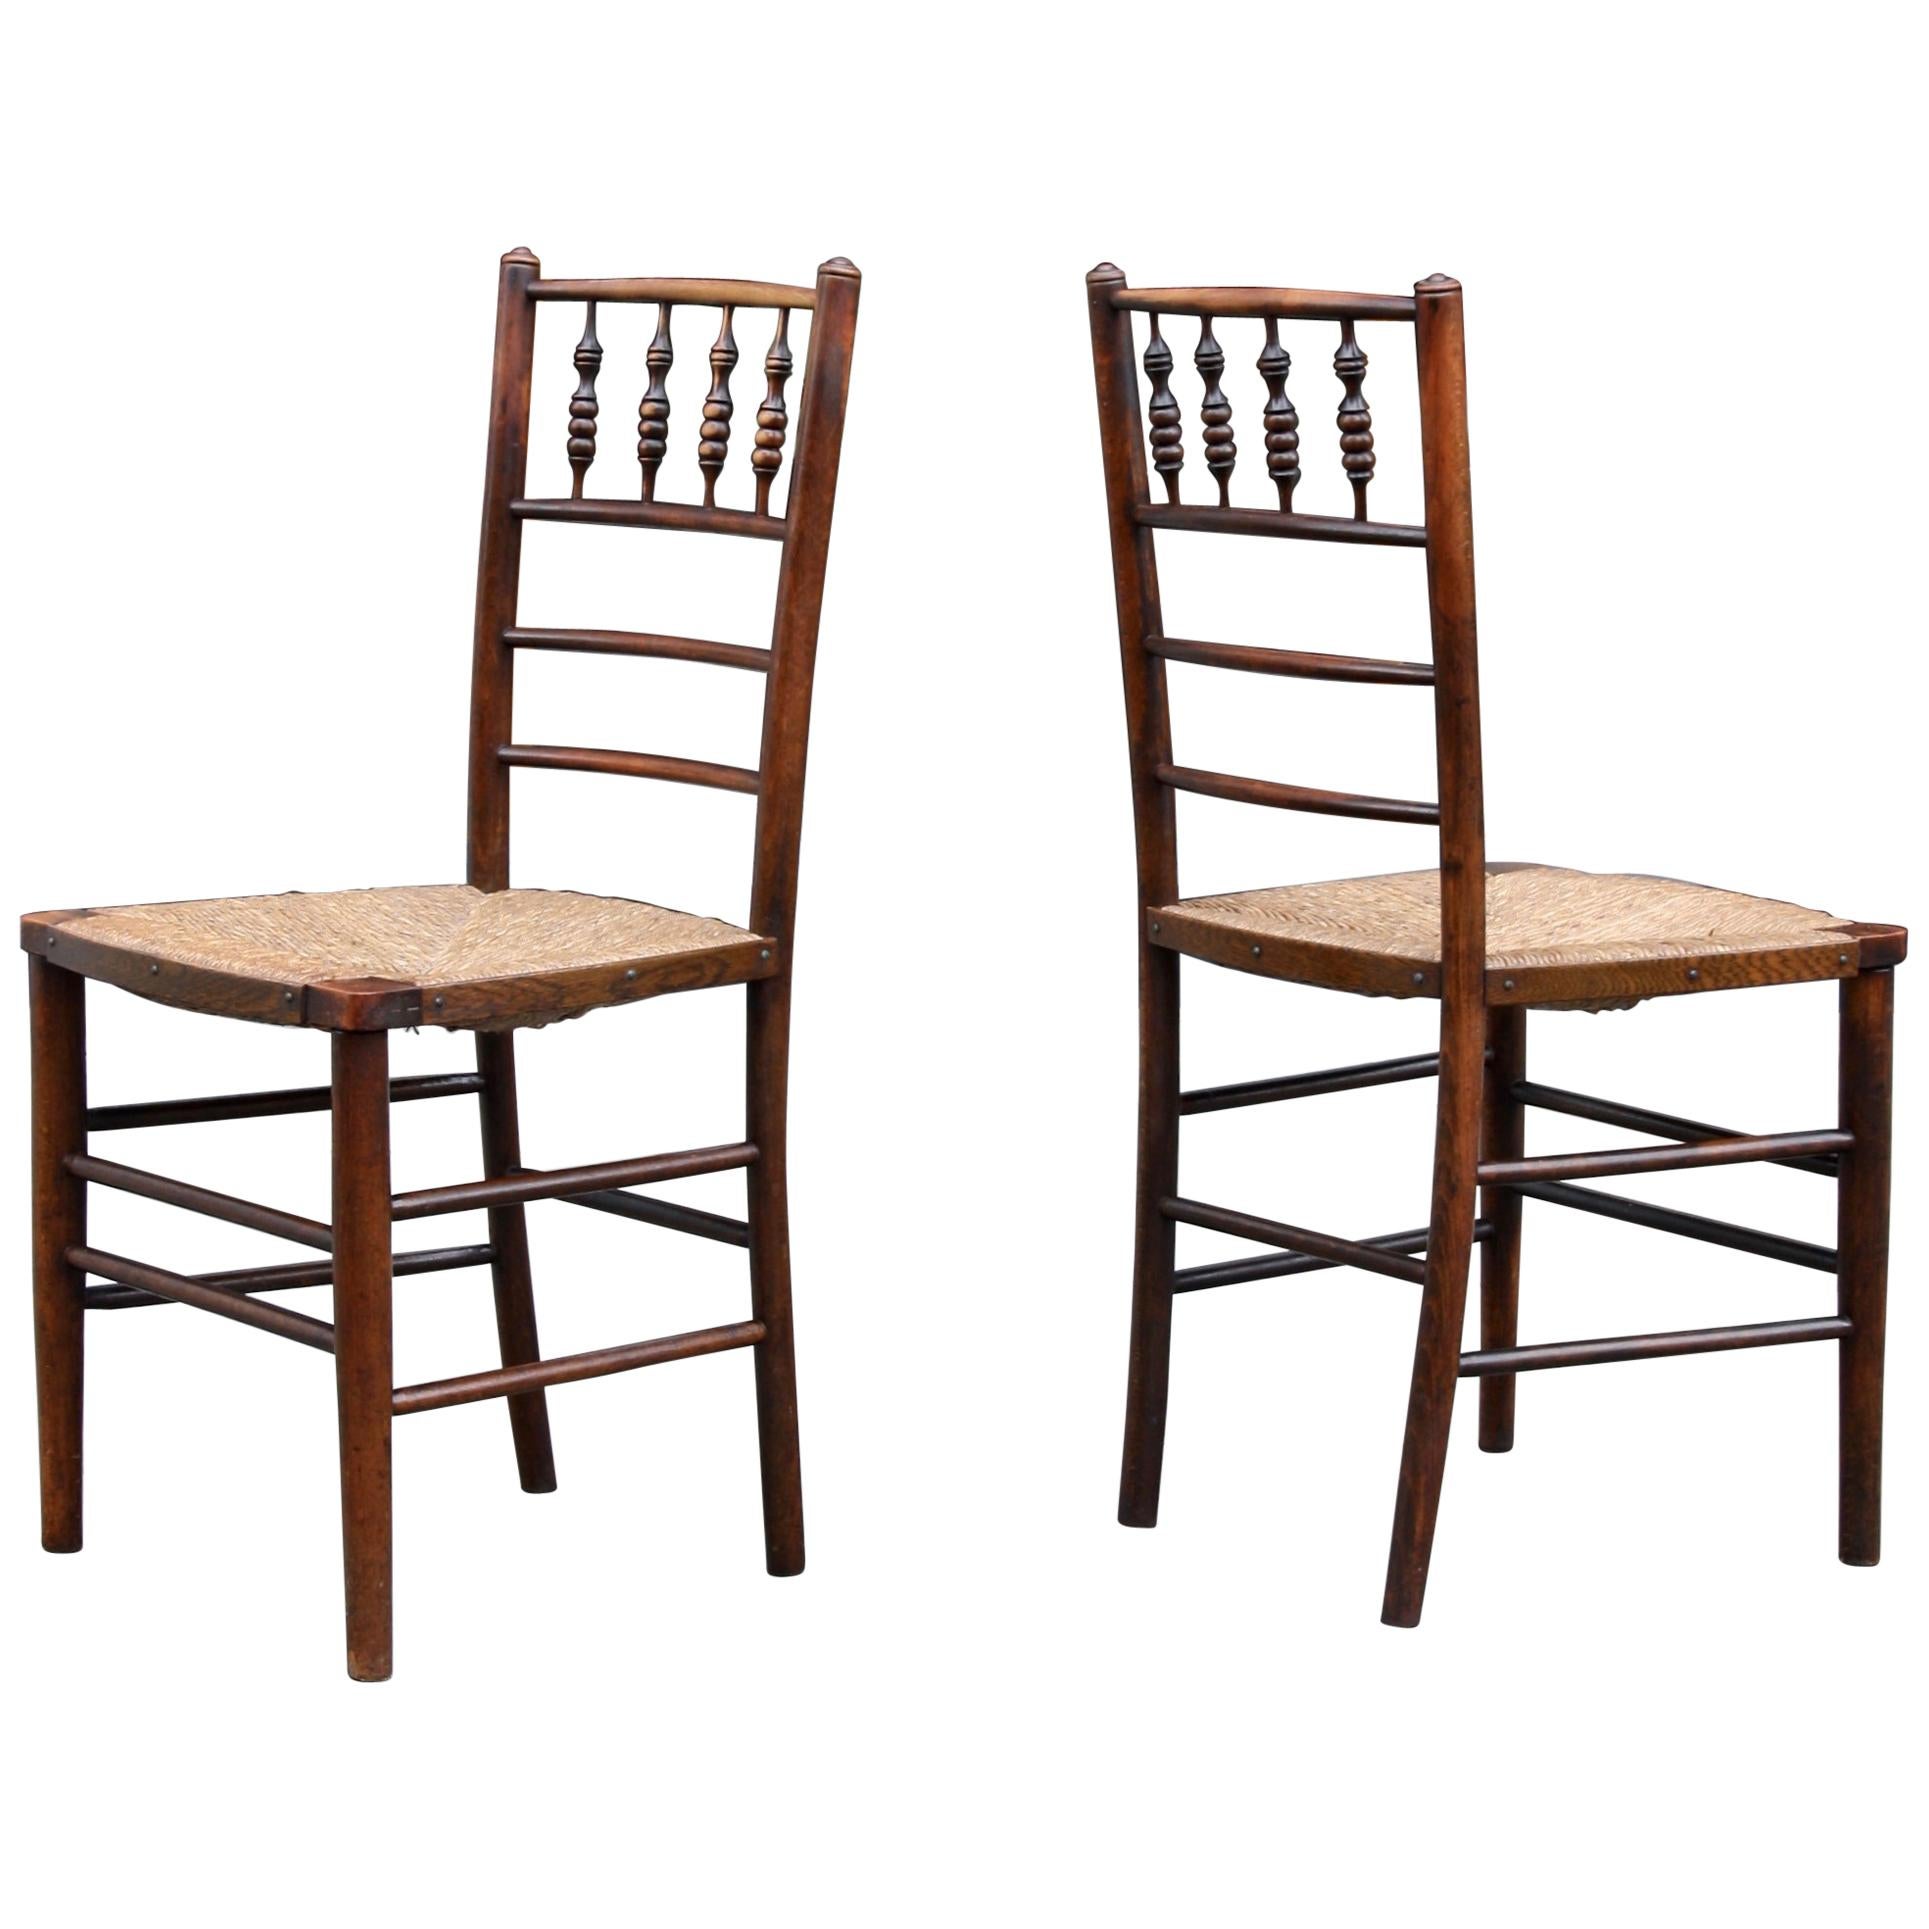 Morris & Co Pair of Arts & Crafts ‘Sussex’ Chairs, 1864